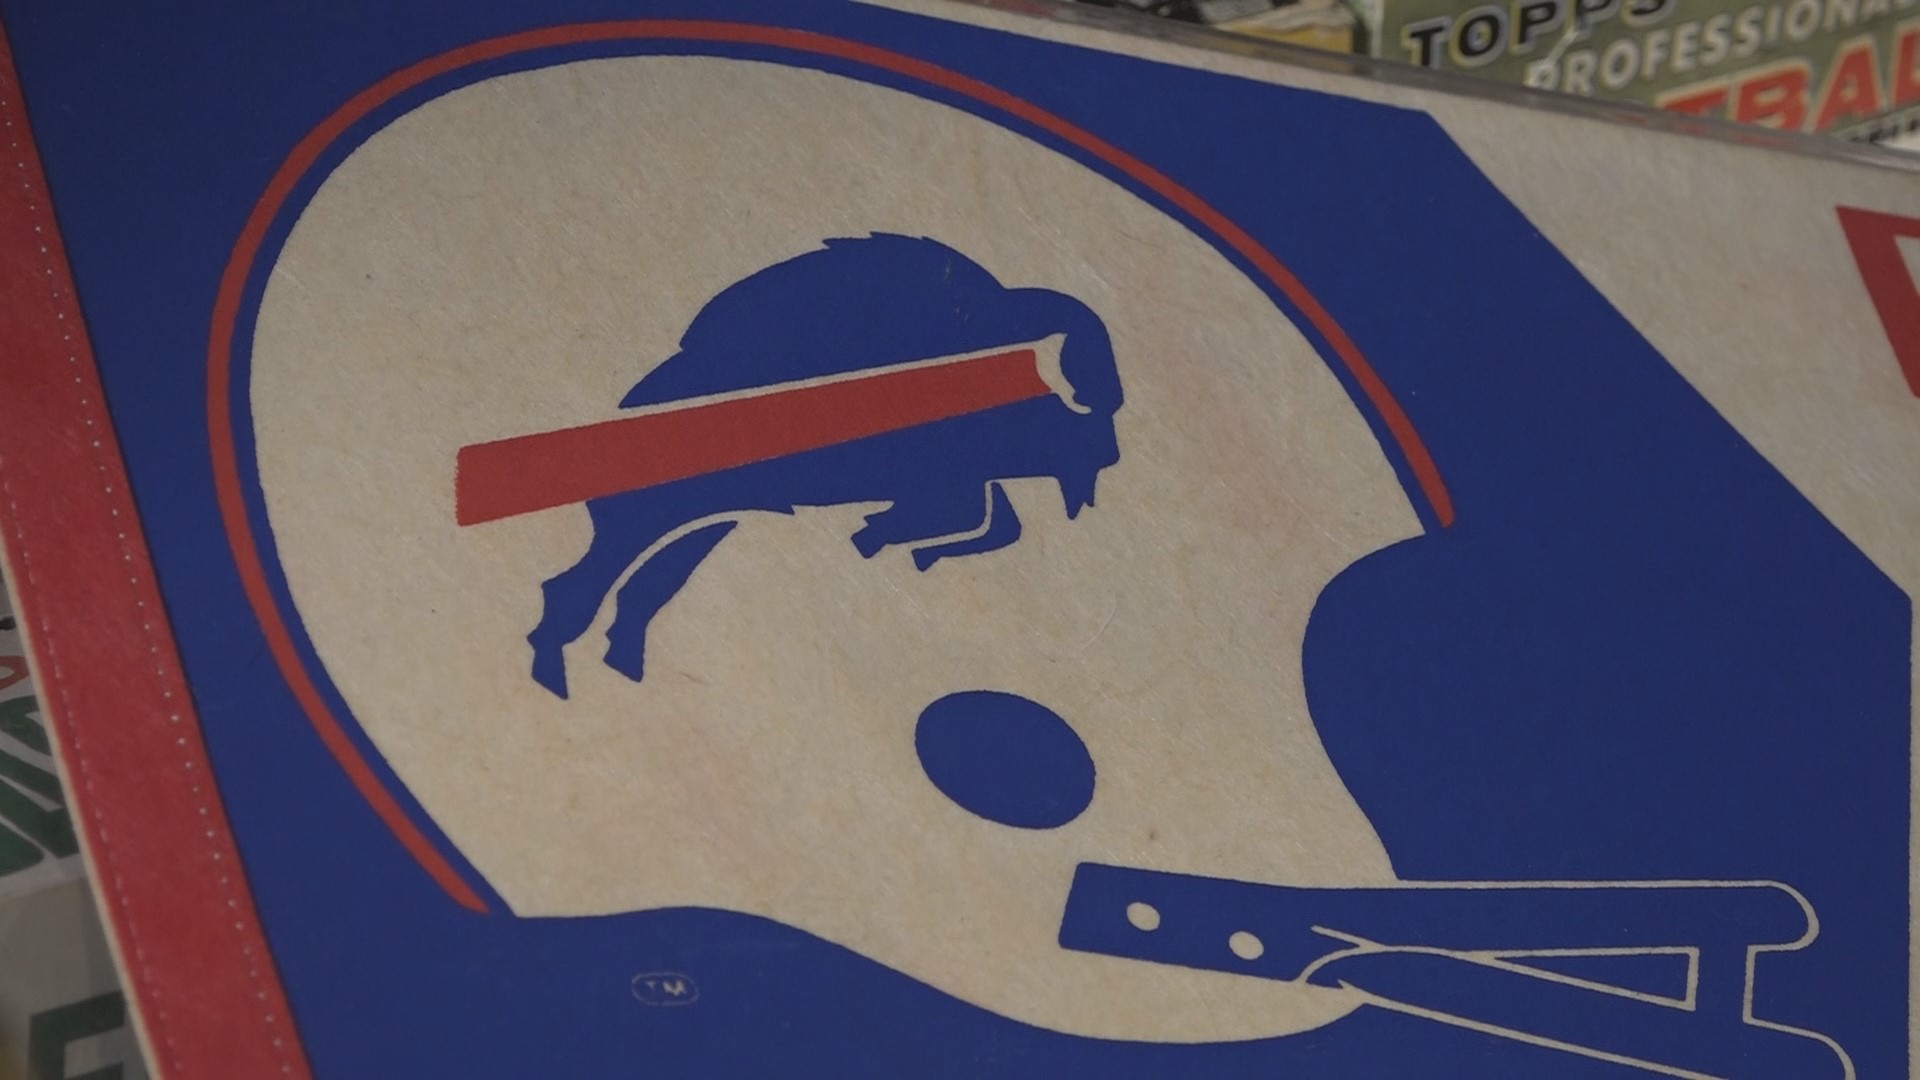 Explaining the evolution of the Buffalo Bills' now iconic logo which debuted in 1974.